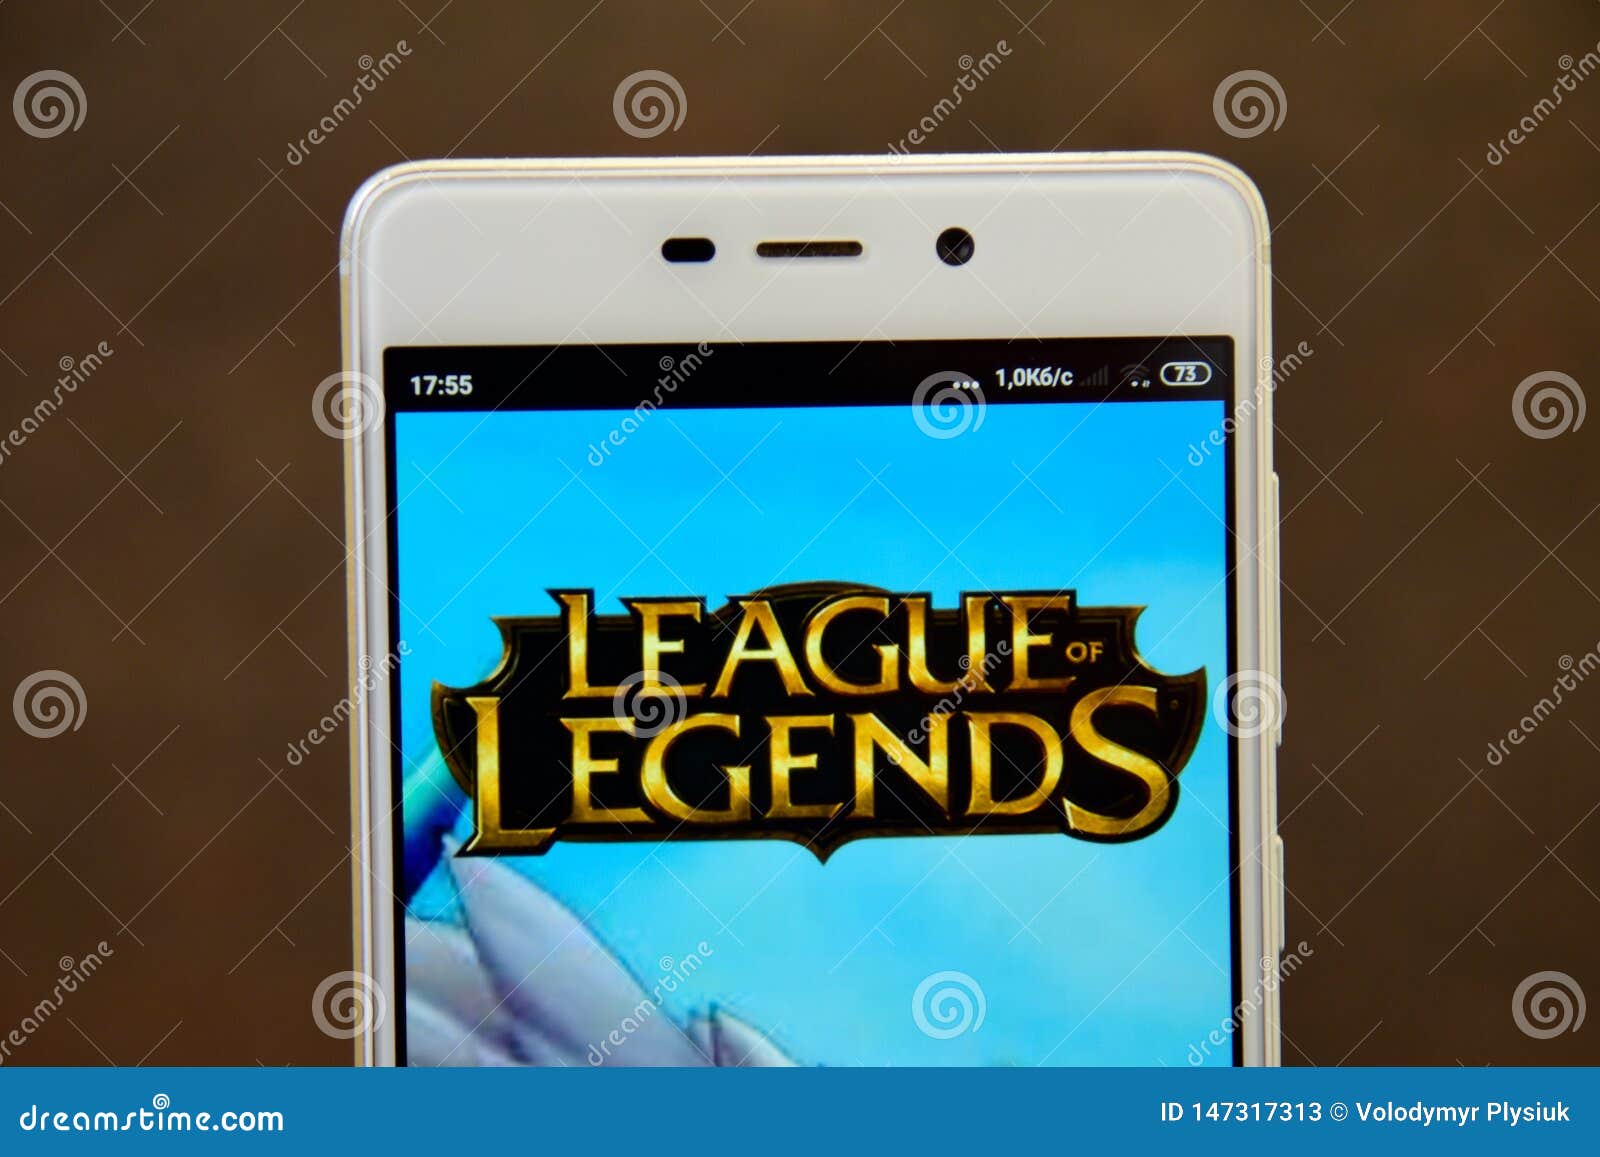 League Of Legends Logo Seen On The Smartphone Screen Editorial Stock Photo Image Of Illustrative Legends